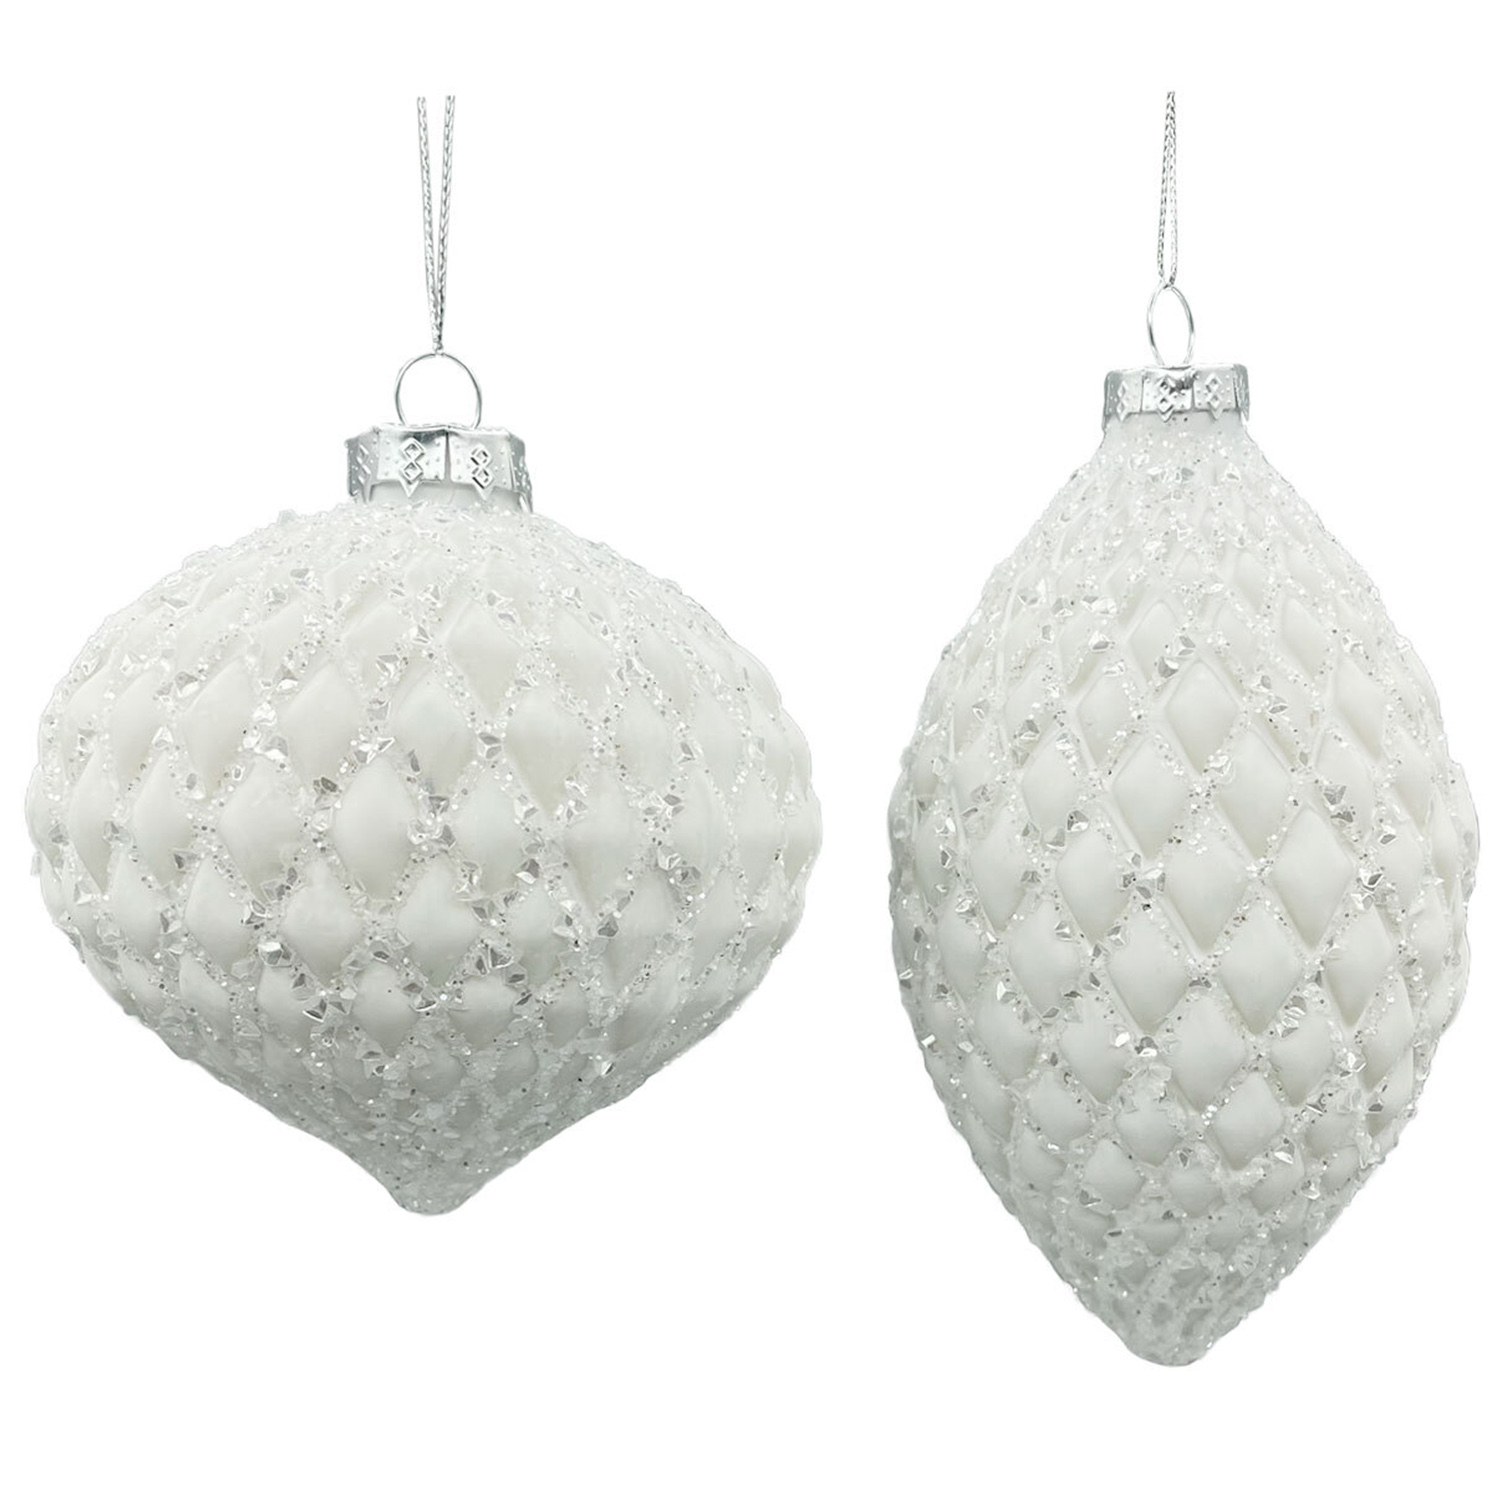 Single Midnight Fantasy White Glittered Ridged Glass Bauble in Assorted styles Image